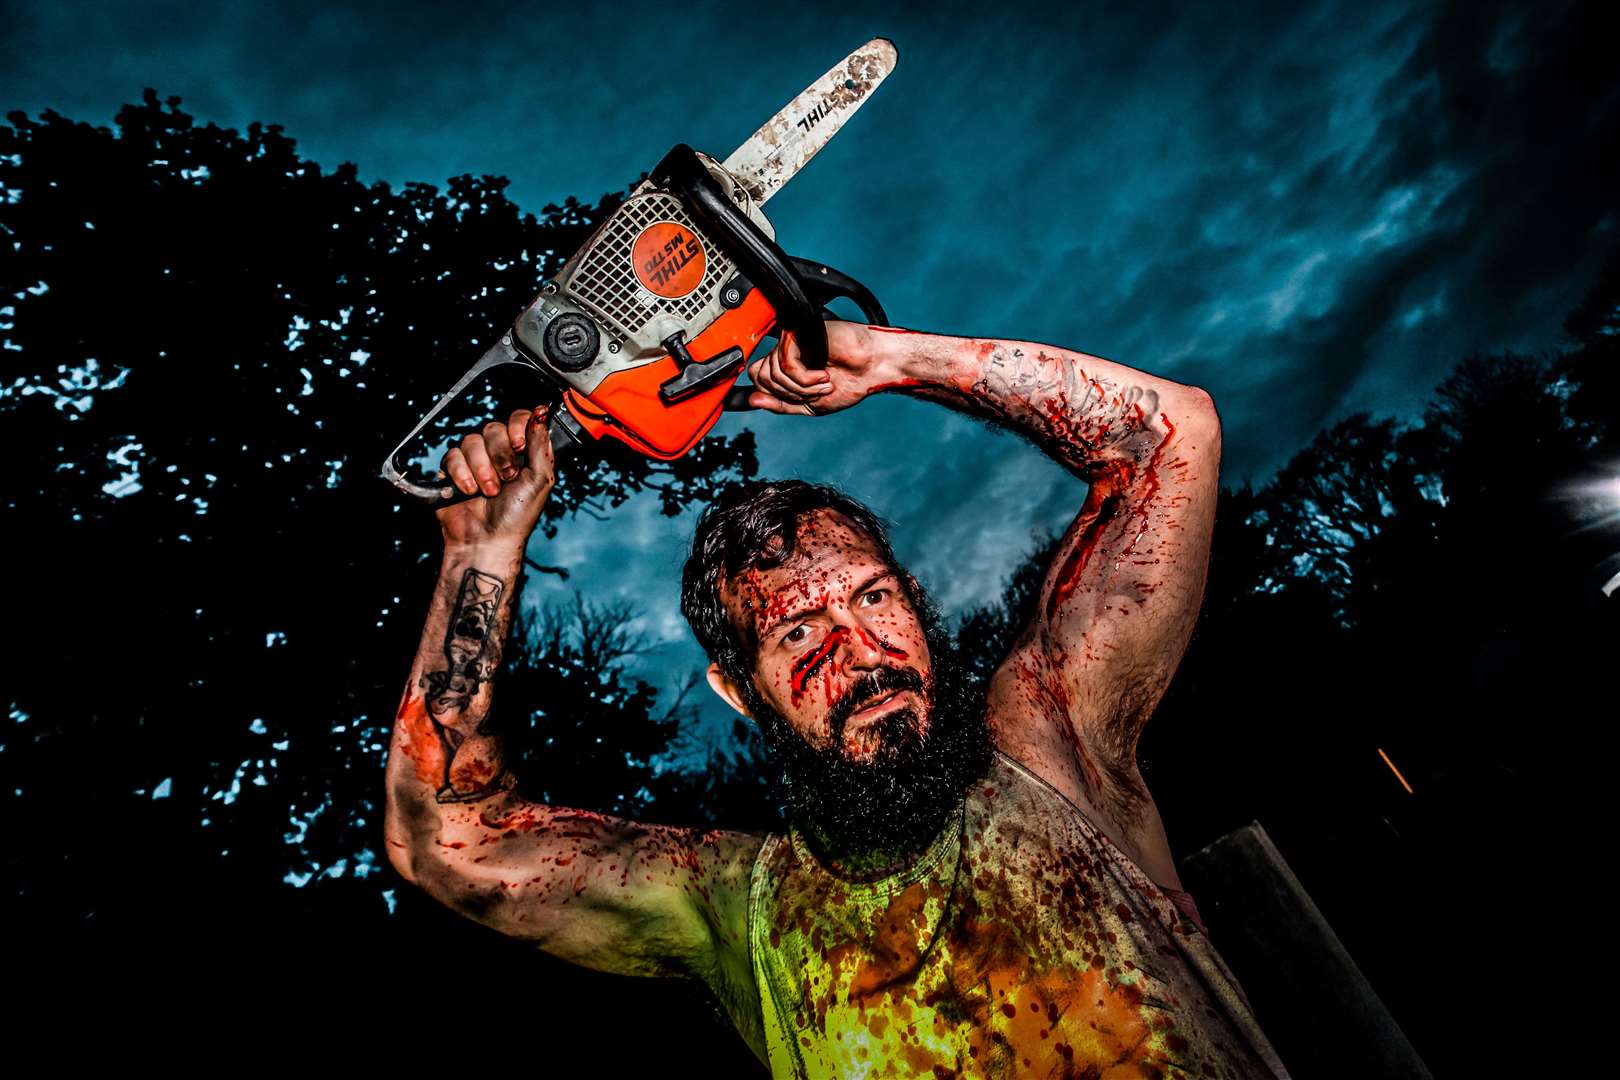 Shocktoberfest at Tulleys Farm is one of the biggest scare events in Europe. Picture: Stephen Candy Photography